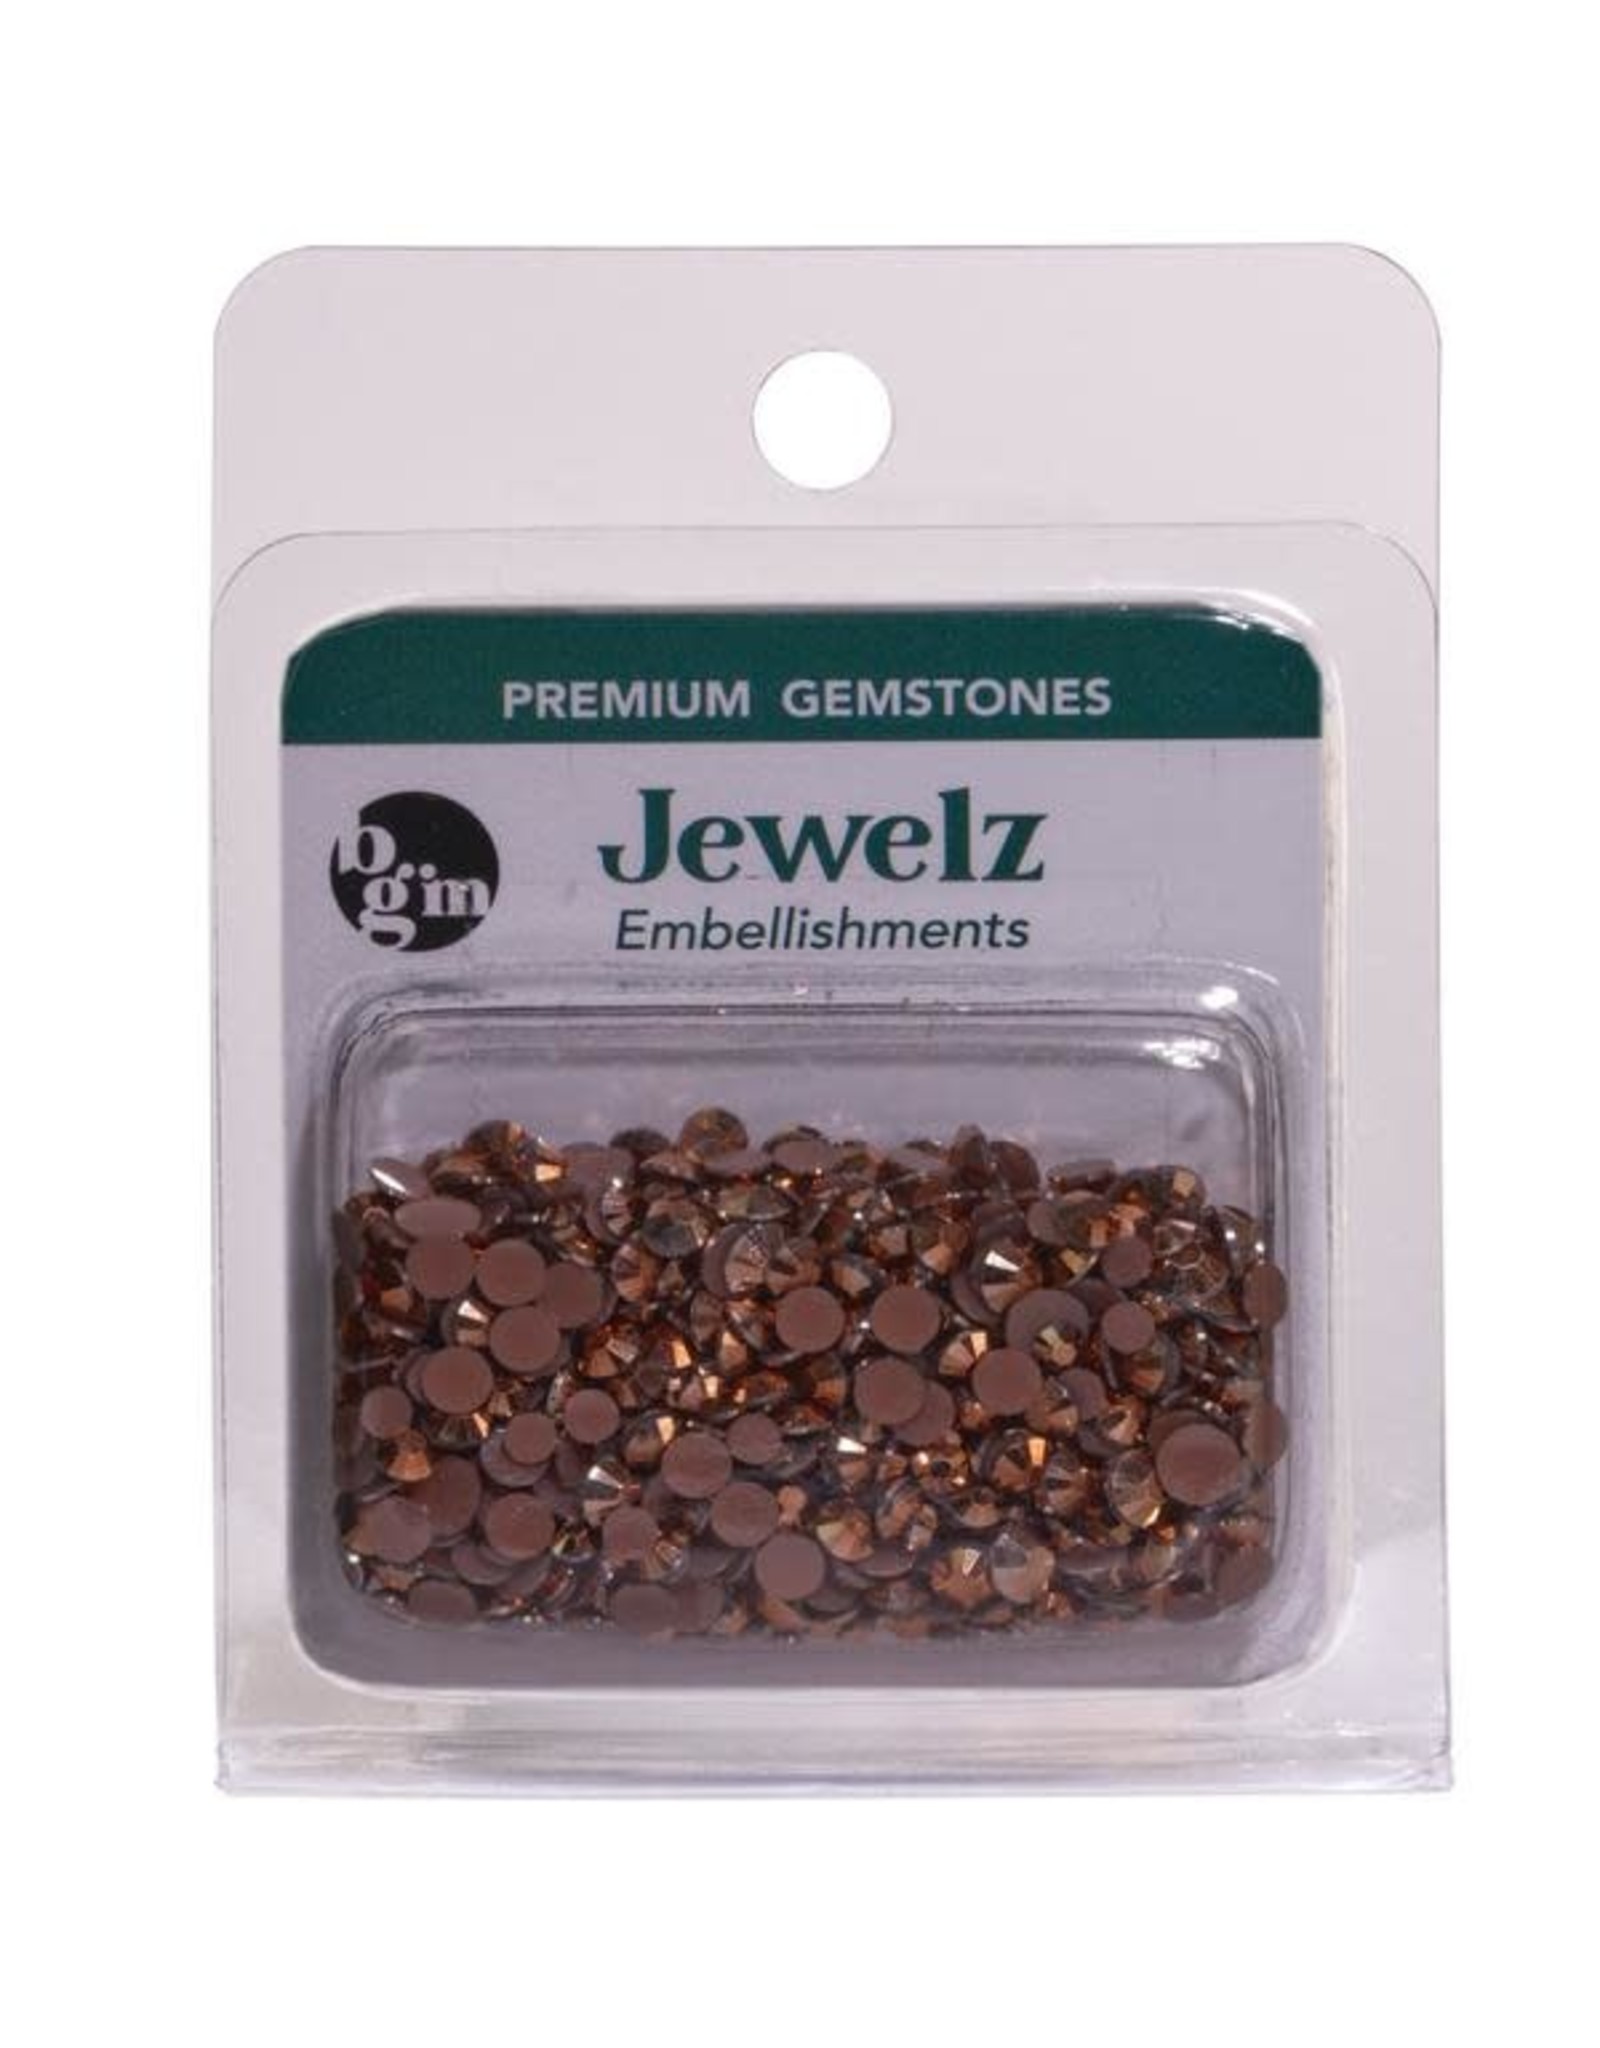 Buttons Galore & More Jewelz-Copper